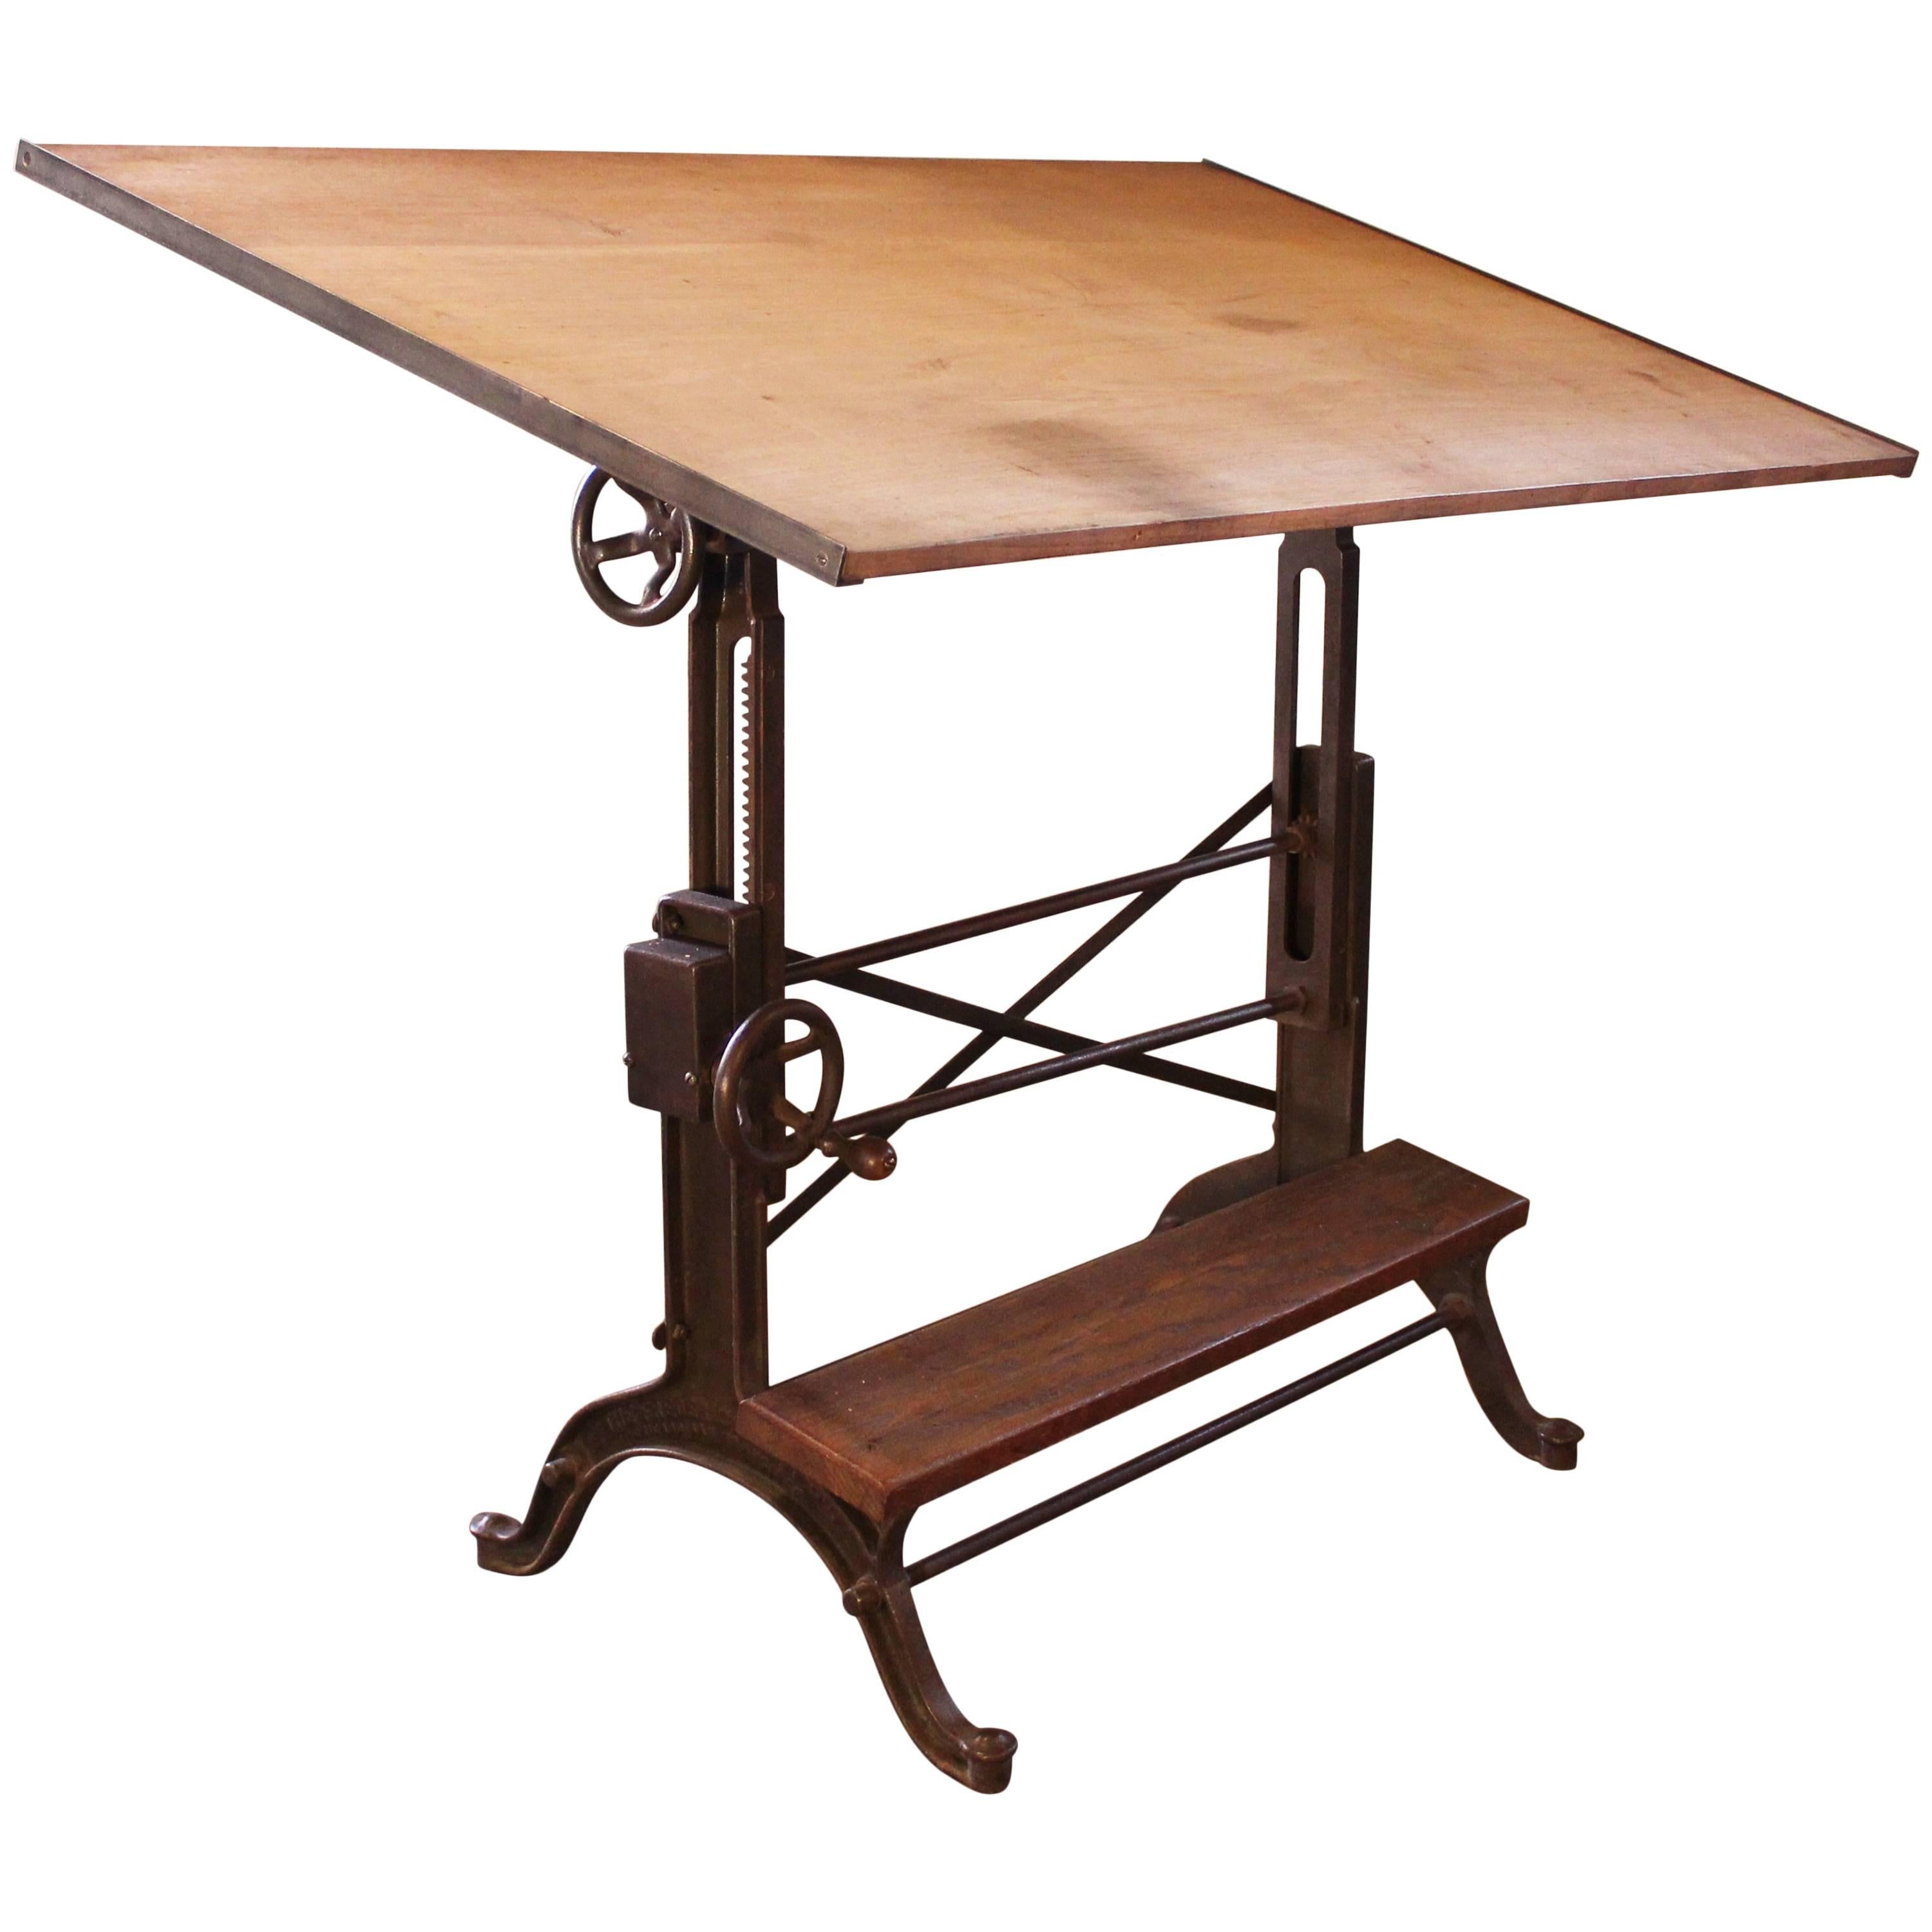 Drafting Table Vintage Industrial Cast Iron and Wood Frederick Post Adjustable 